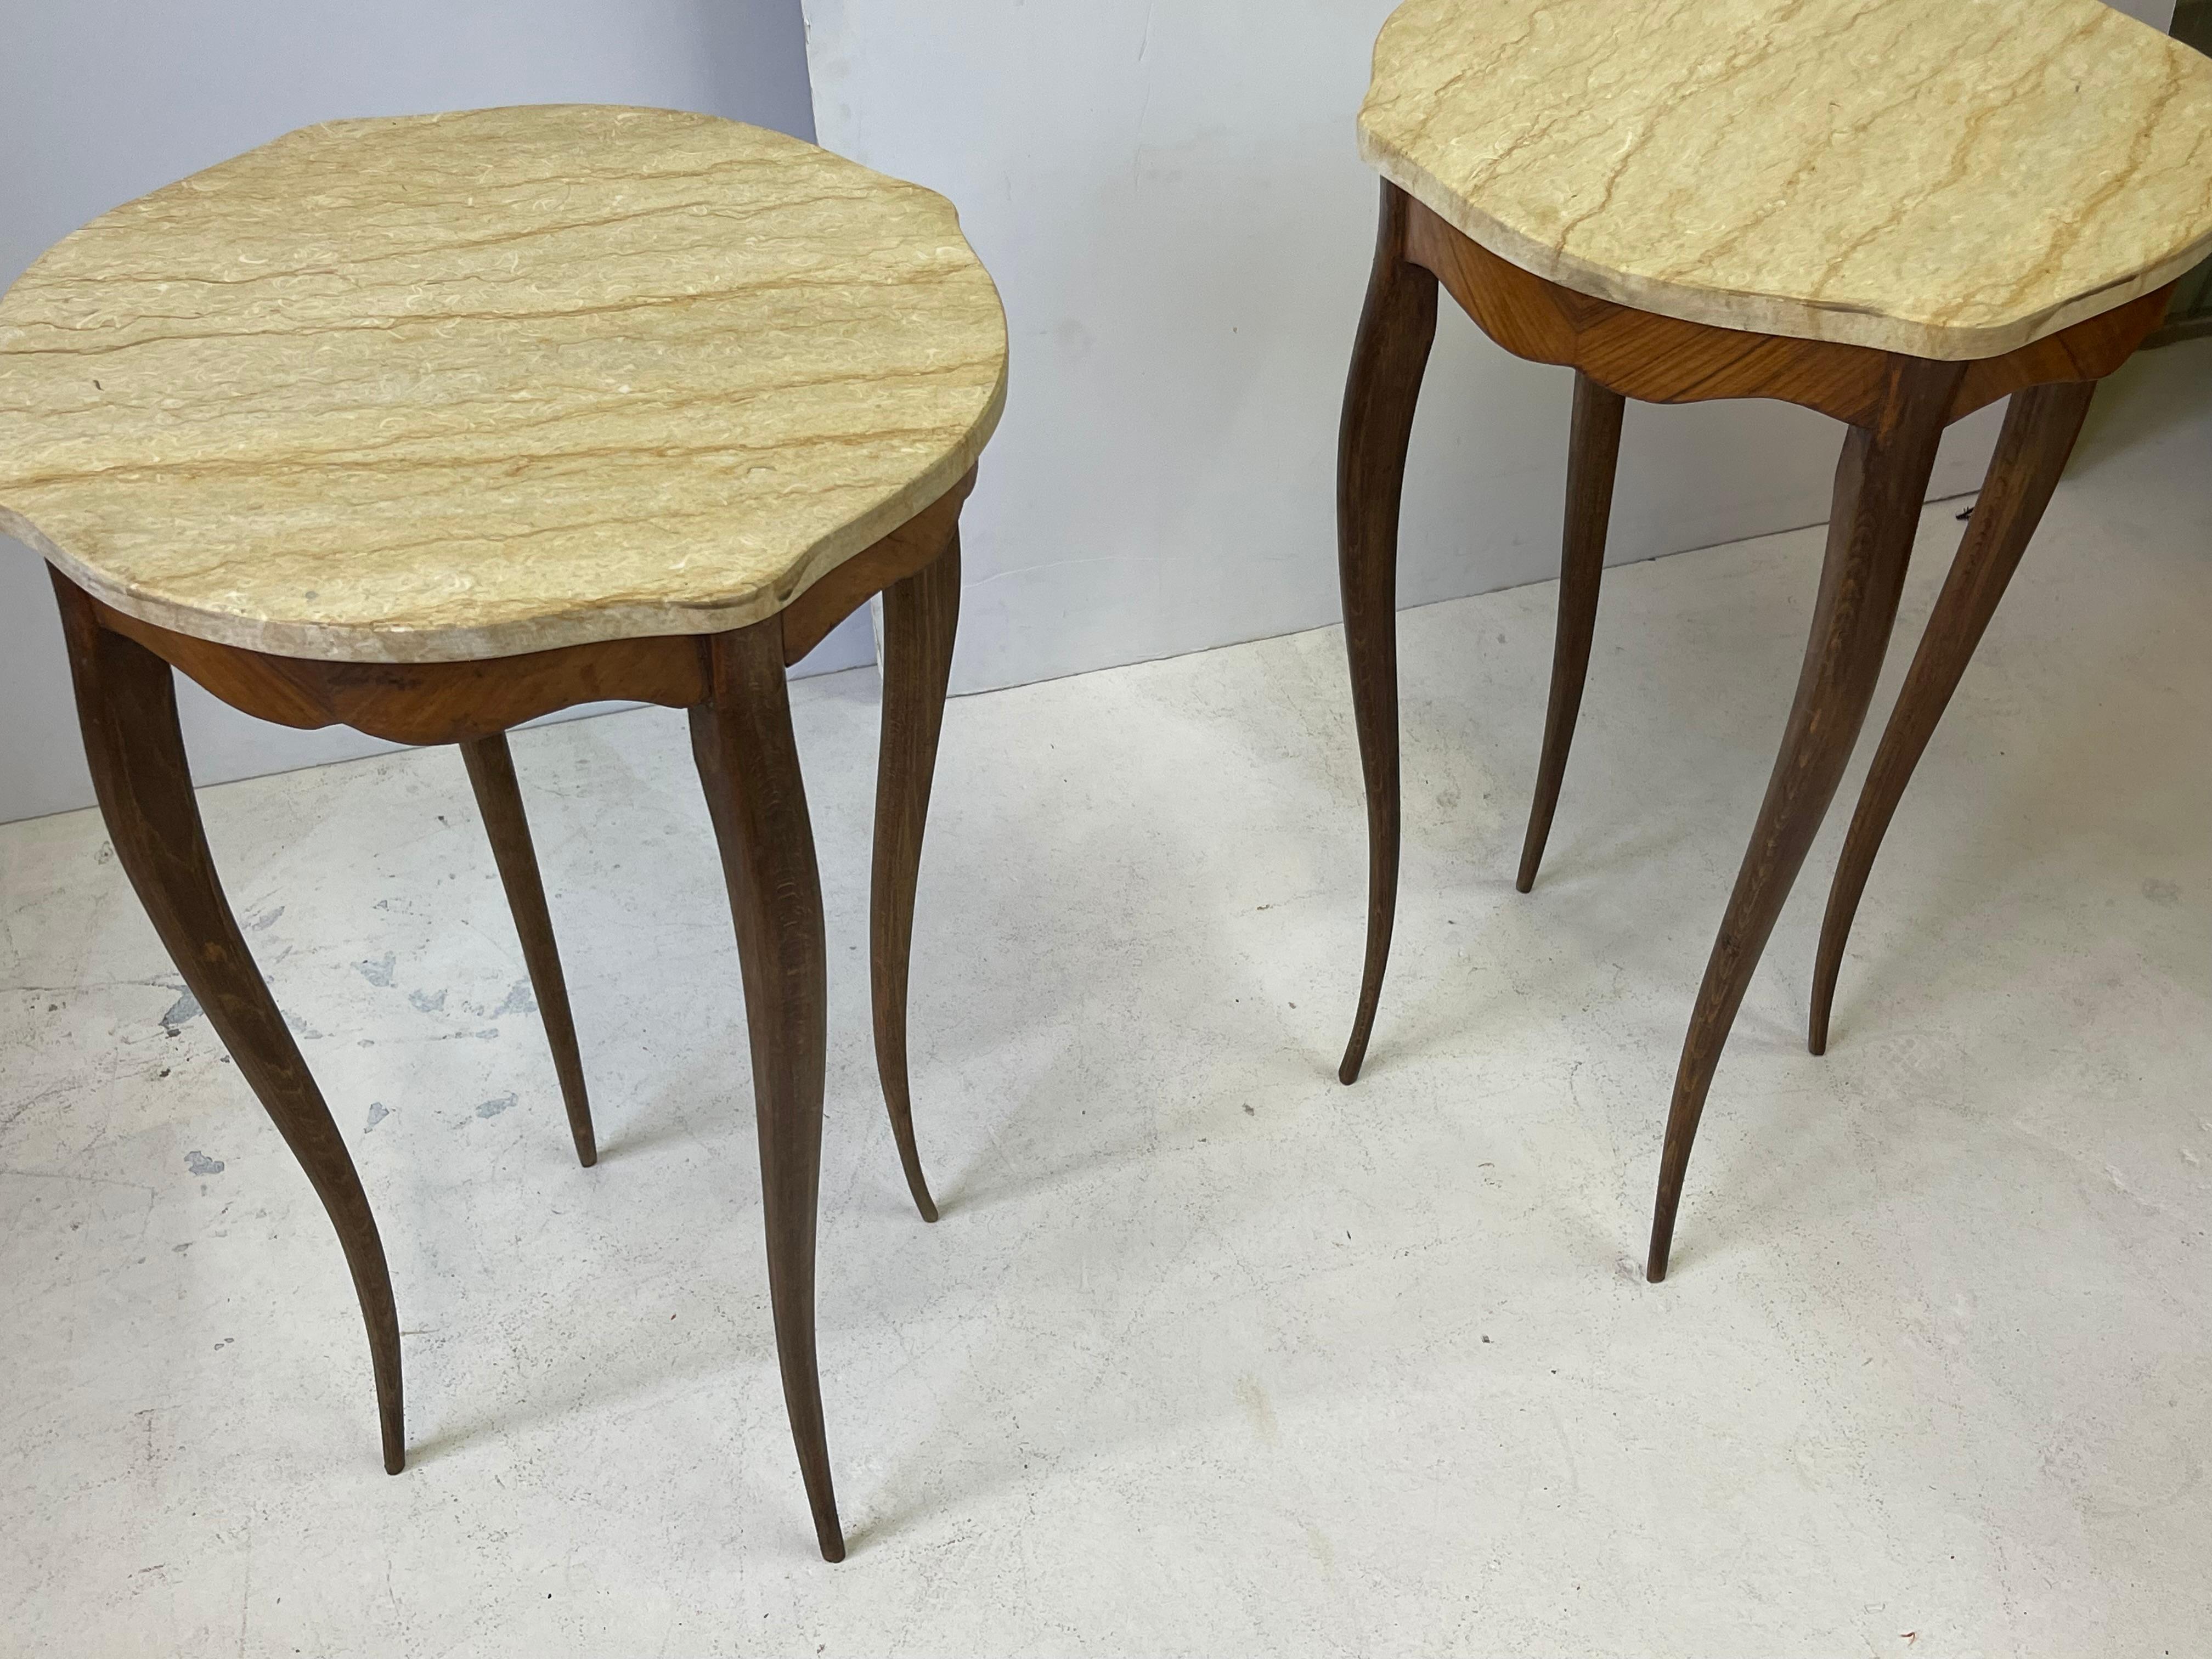 Unique pair of early 20th Century tables elegantly crafted with fine tapering legs, scalloped aprons and shaped marble tops. The tables were made in Italy of Kingswood and in the style of Art Nouveau, Circa 1910. 

The tables measure 30.25